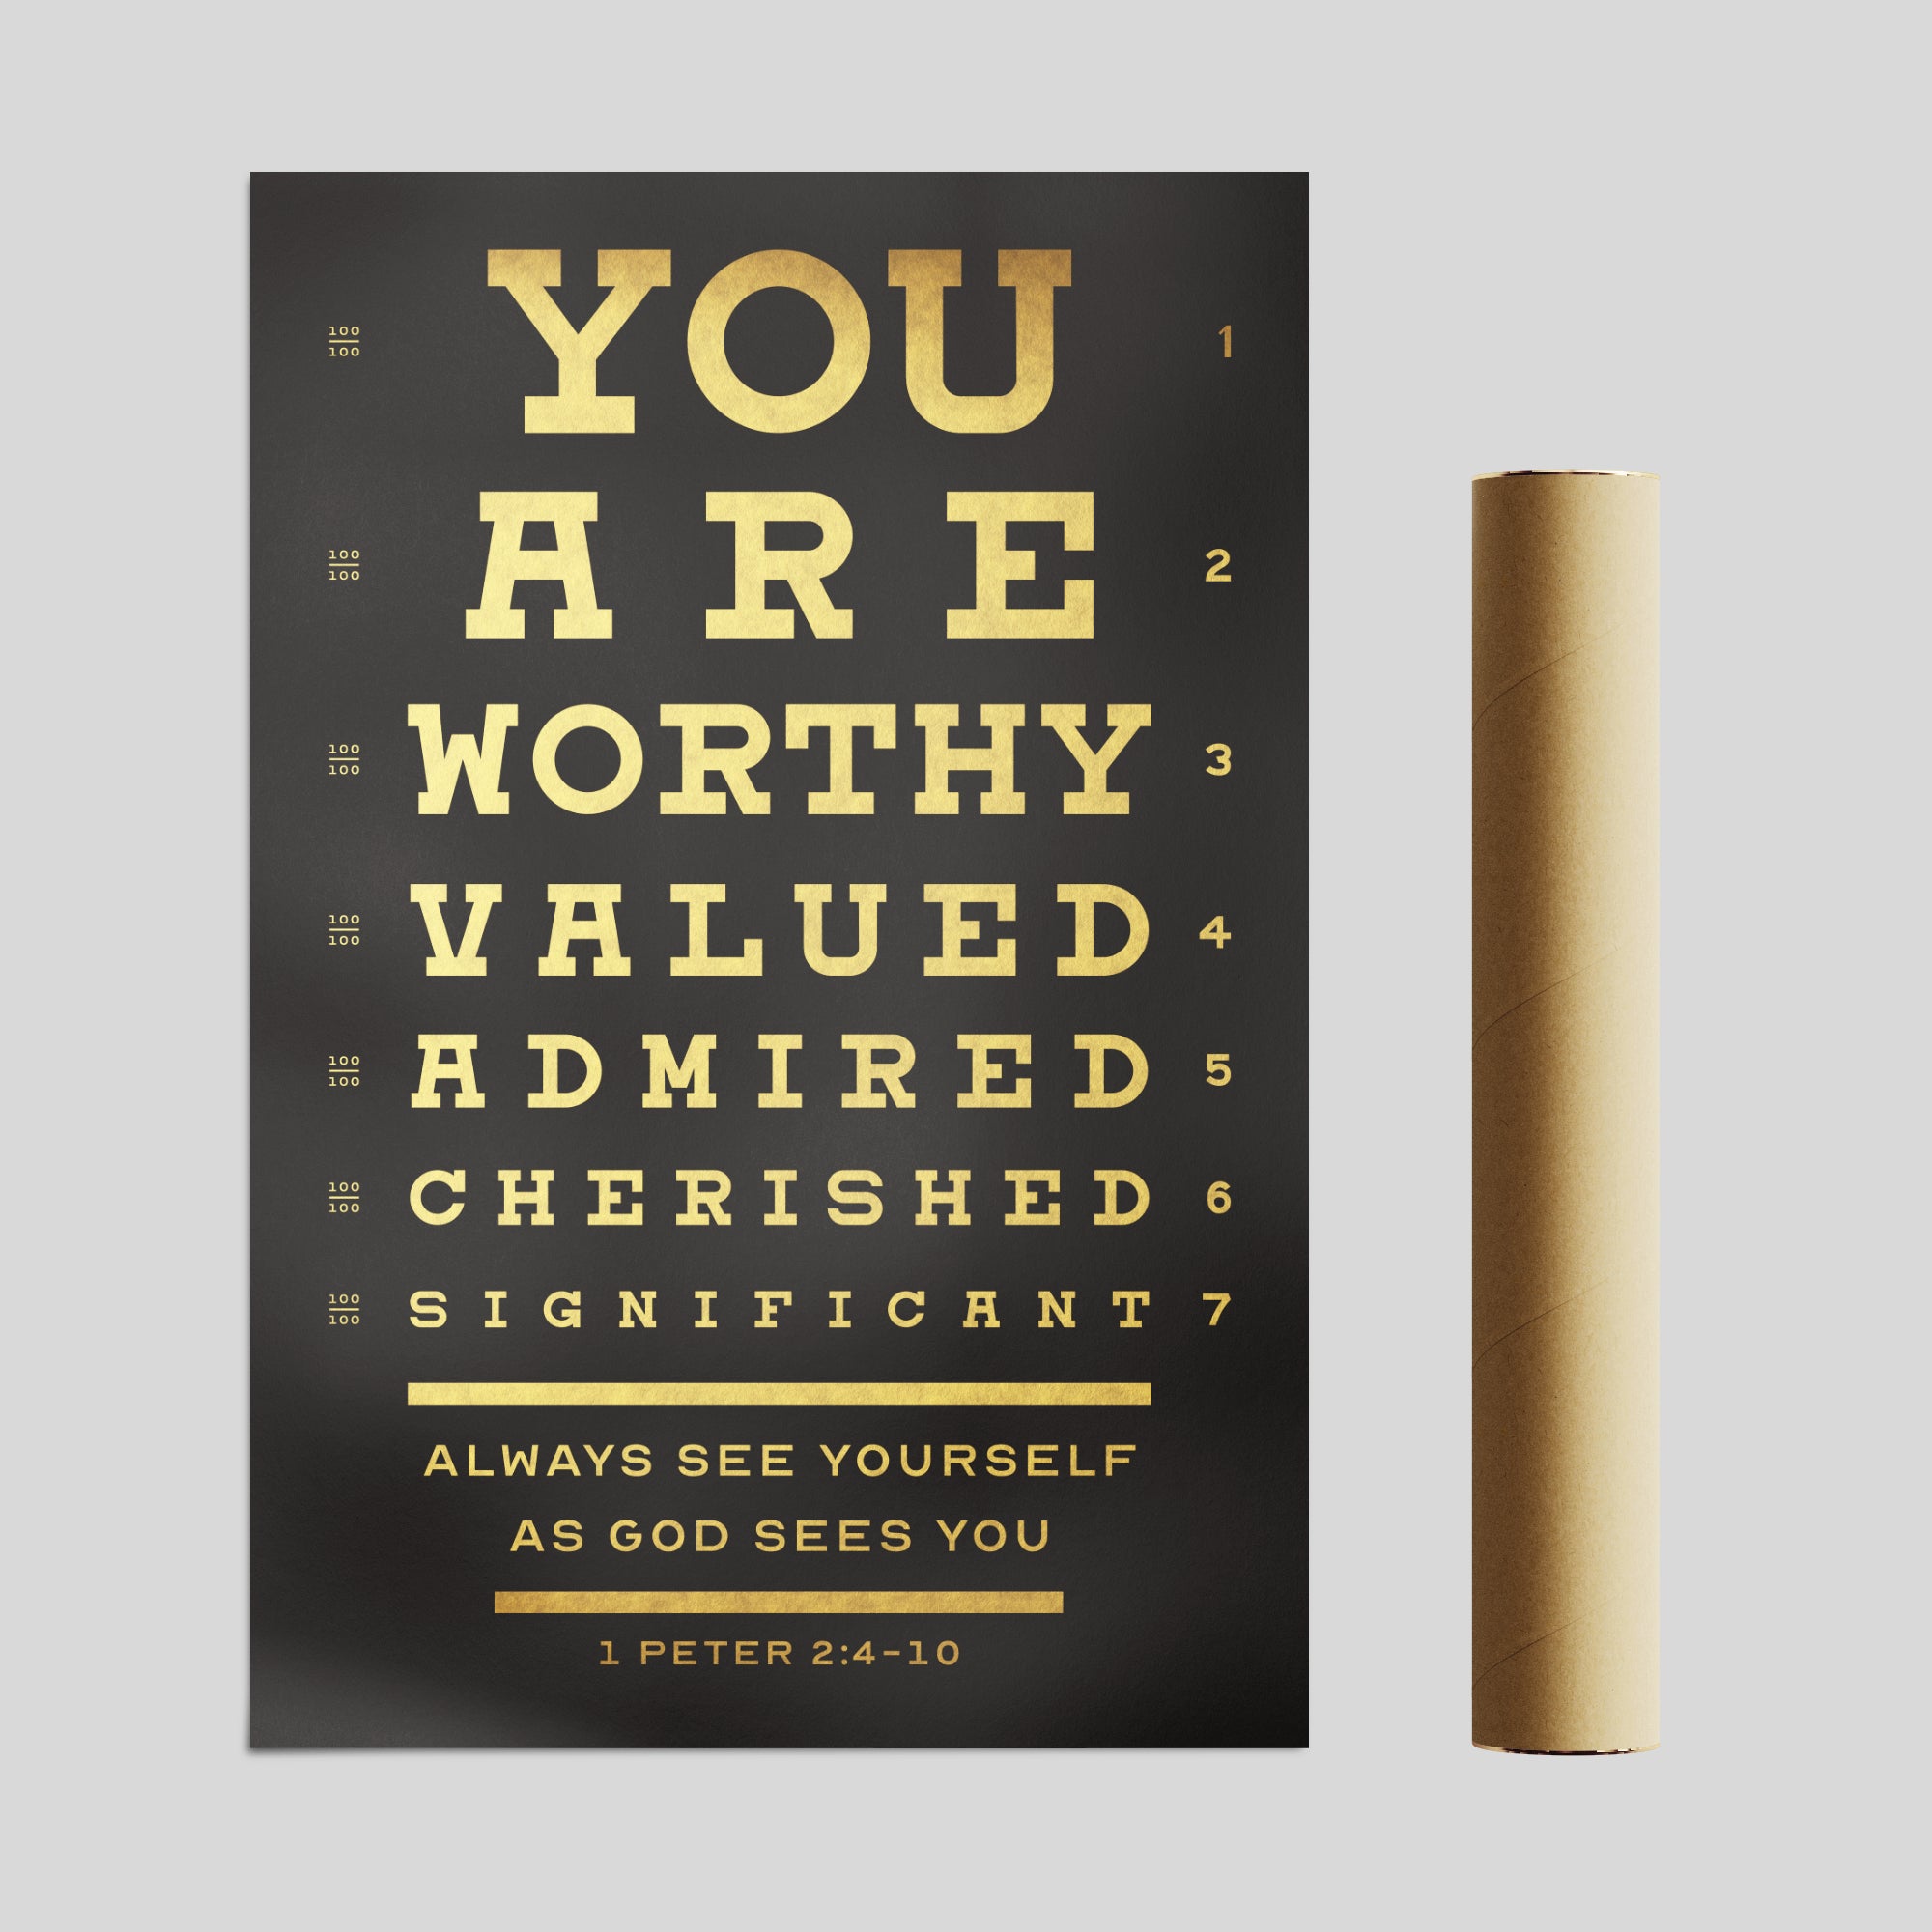 See Yourself as God Sees You Poster